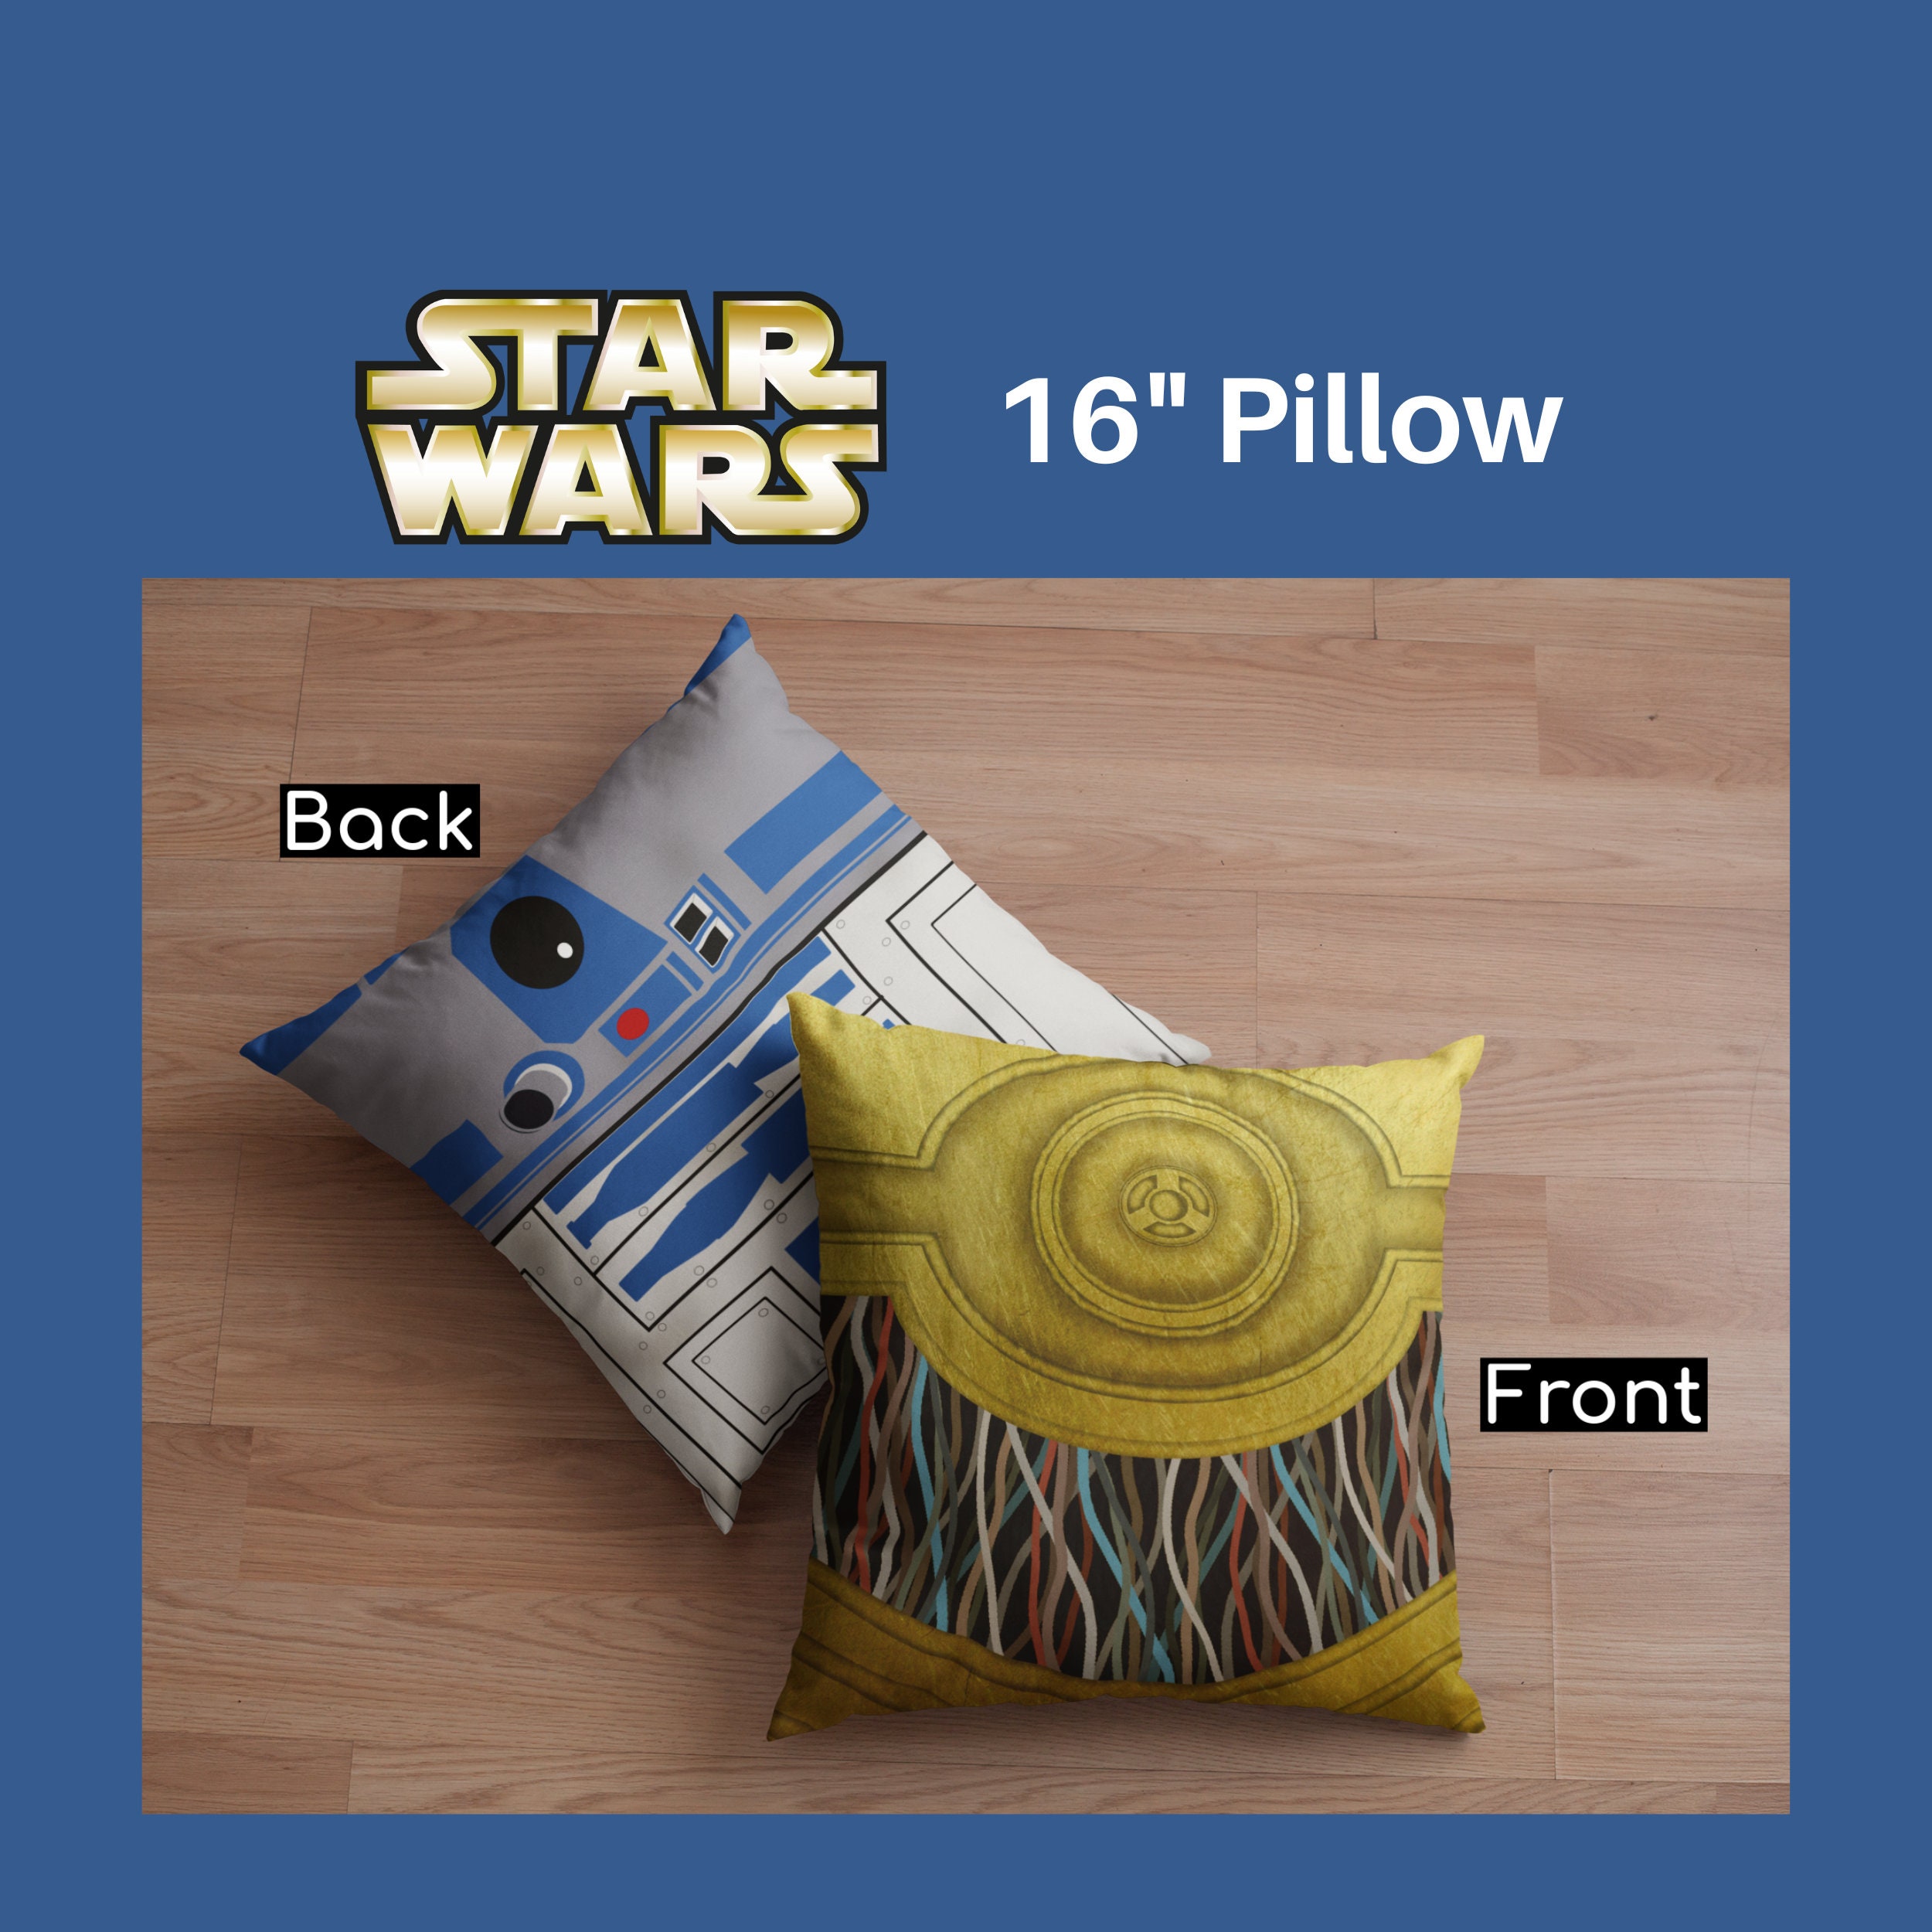 STAR WARS 3 Throw Pillow for Sale by jas3241